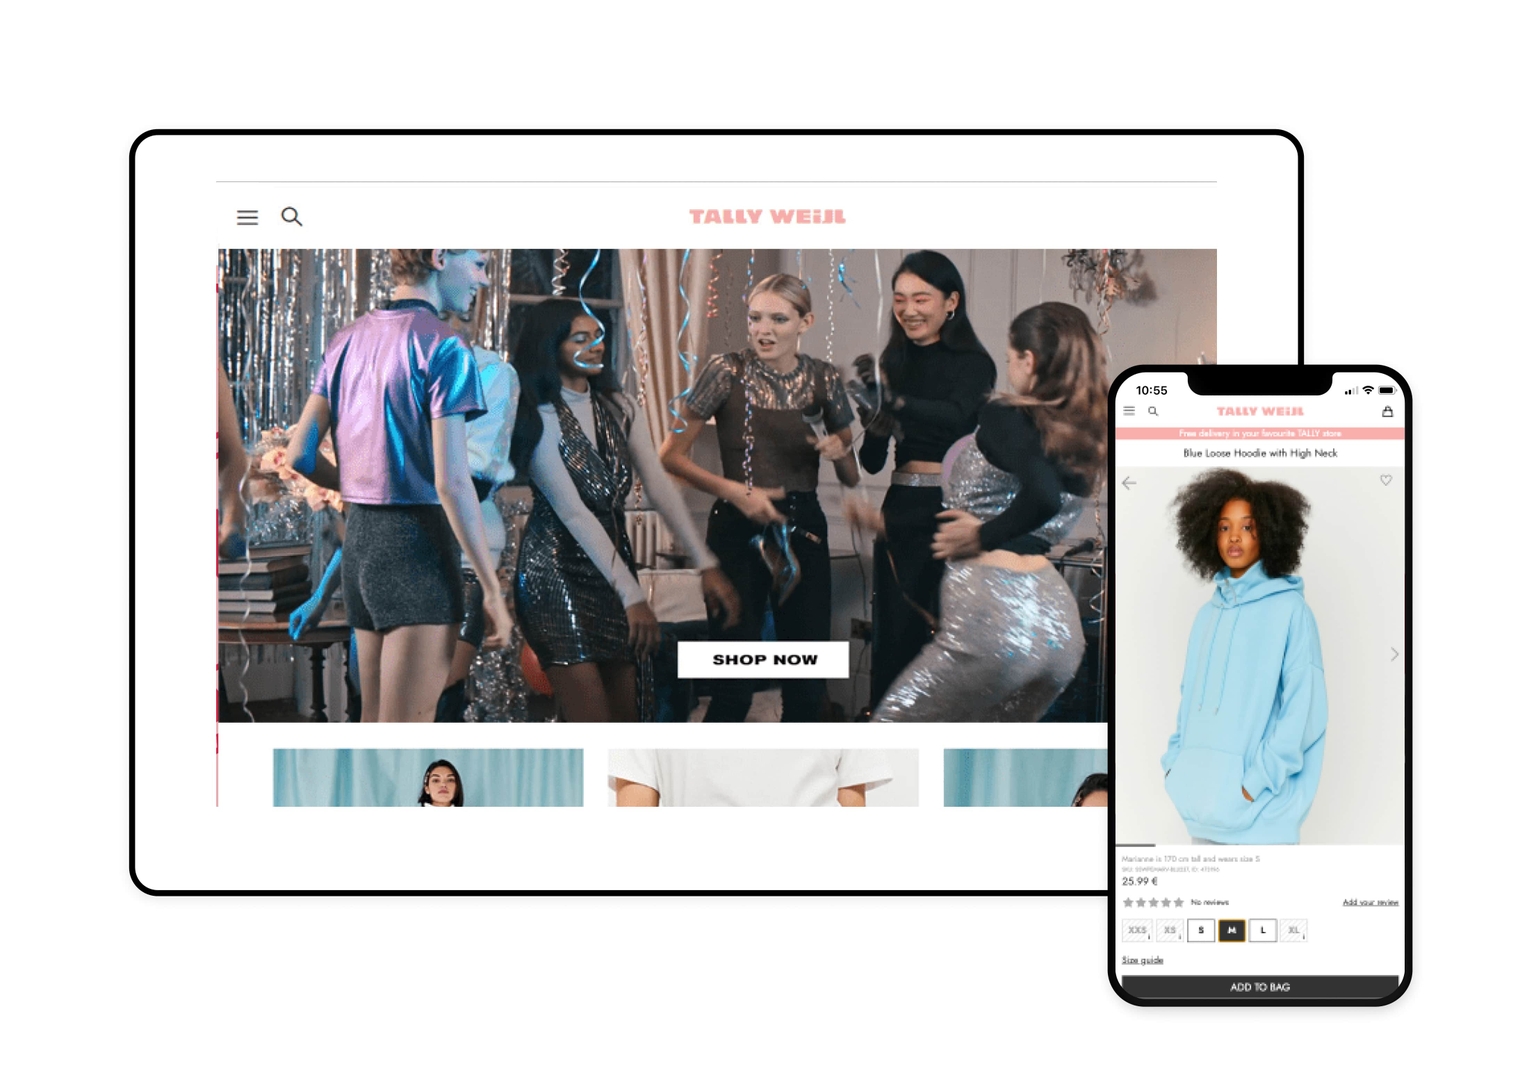 High-resolution images and videos are crucial for a well-performing eCommerce storefront